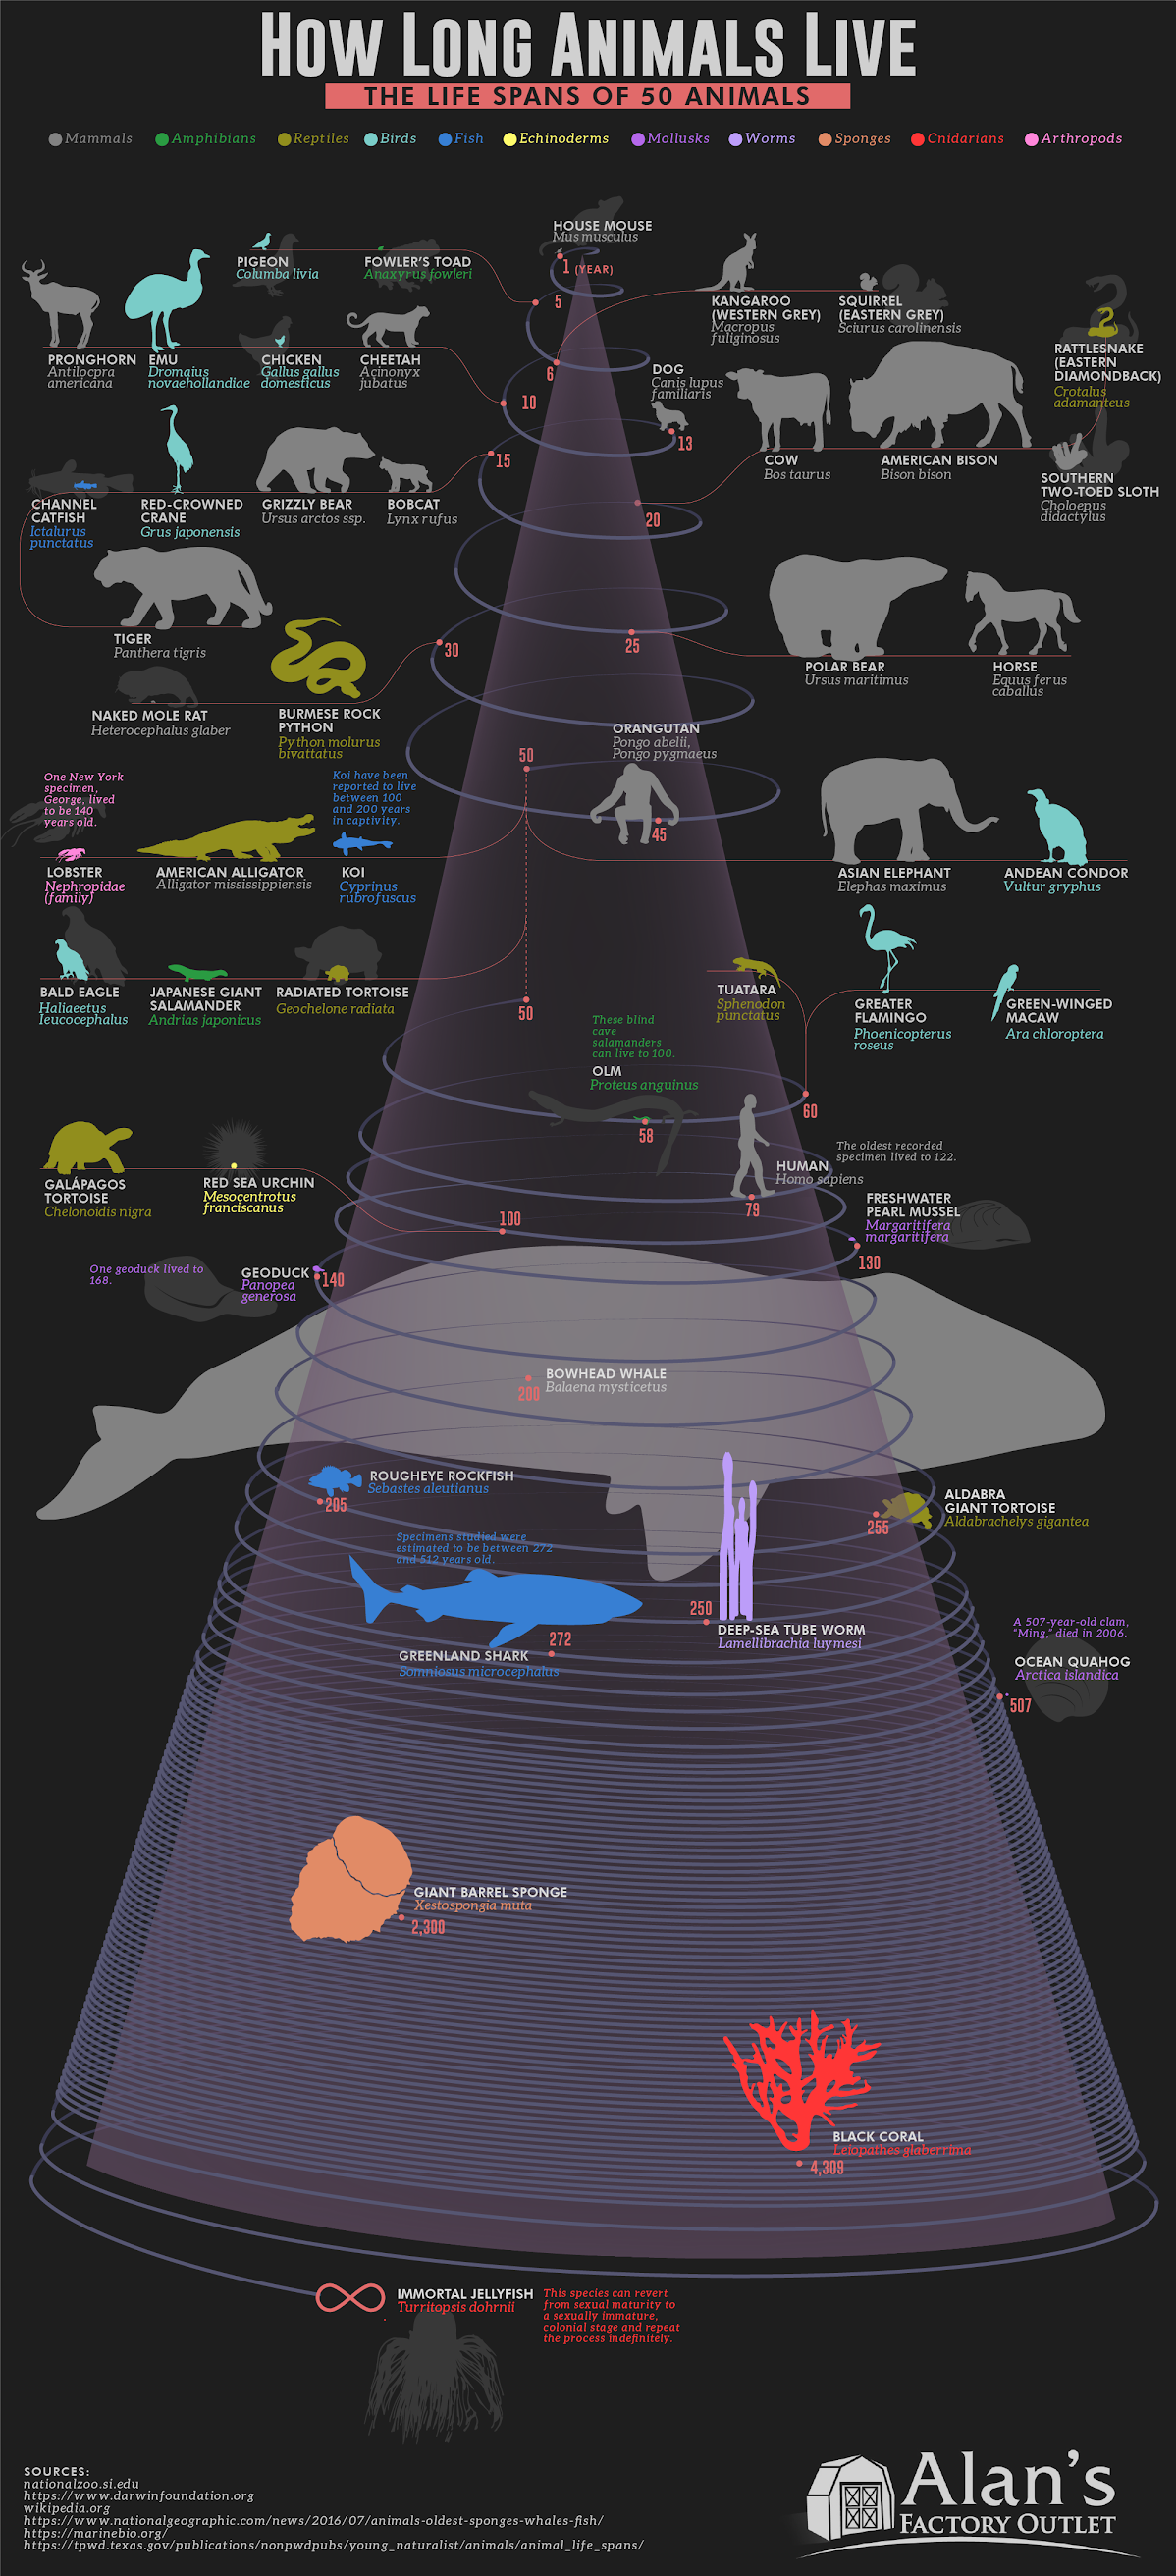  How Long Animals Live: The Life Spans of 50 Animals infographic